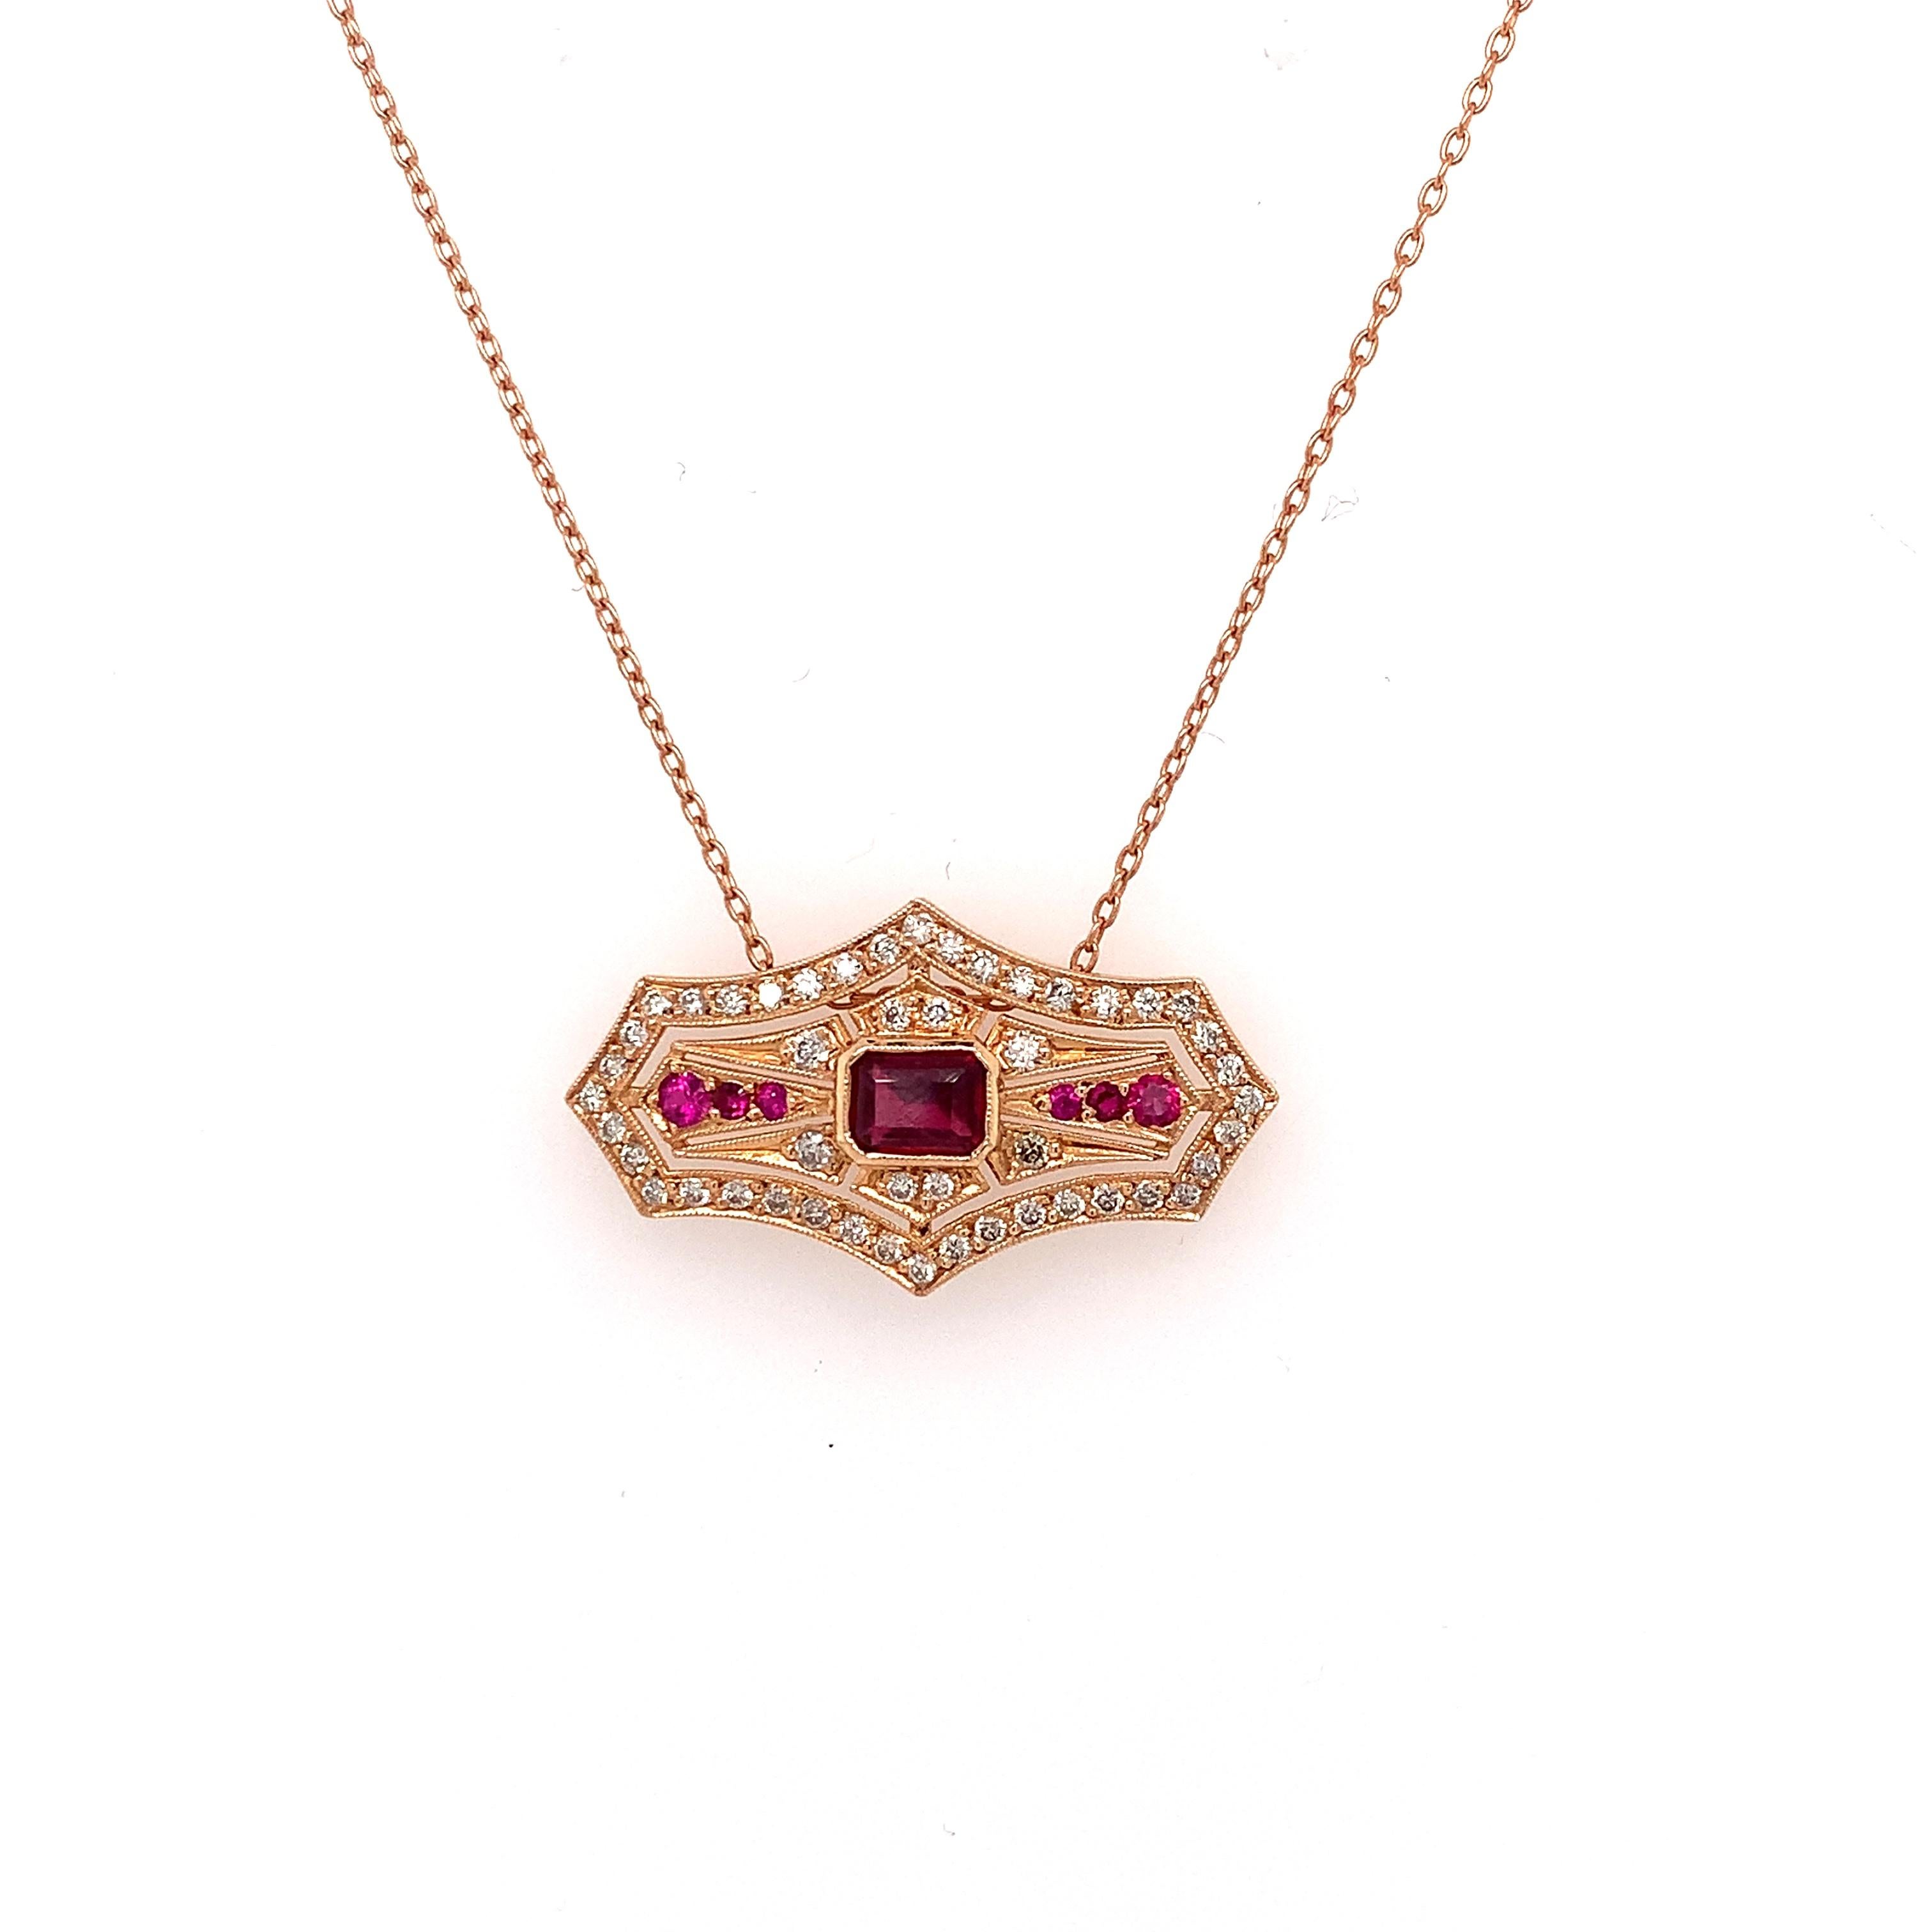 OWN Your Story 14K Rose Gold Ruby and Diamond French Shield Inspired Diagonal Pendant

OWN Your Story brings its 3 generations of family tradition and unparalleled experience with 18K gold, diamonds, and gemstones to create high-level jewelry